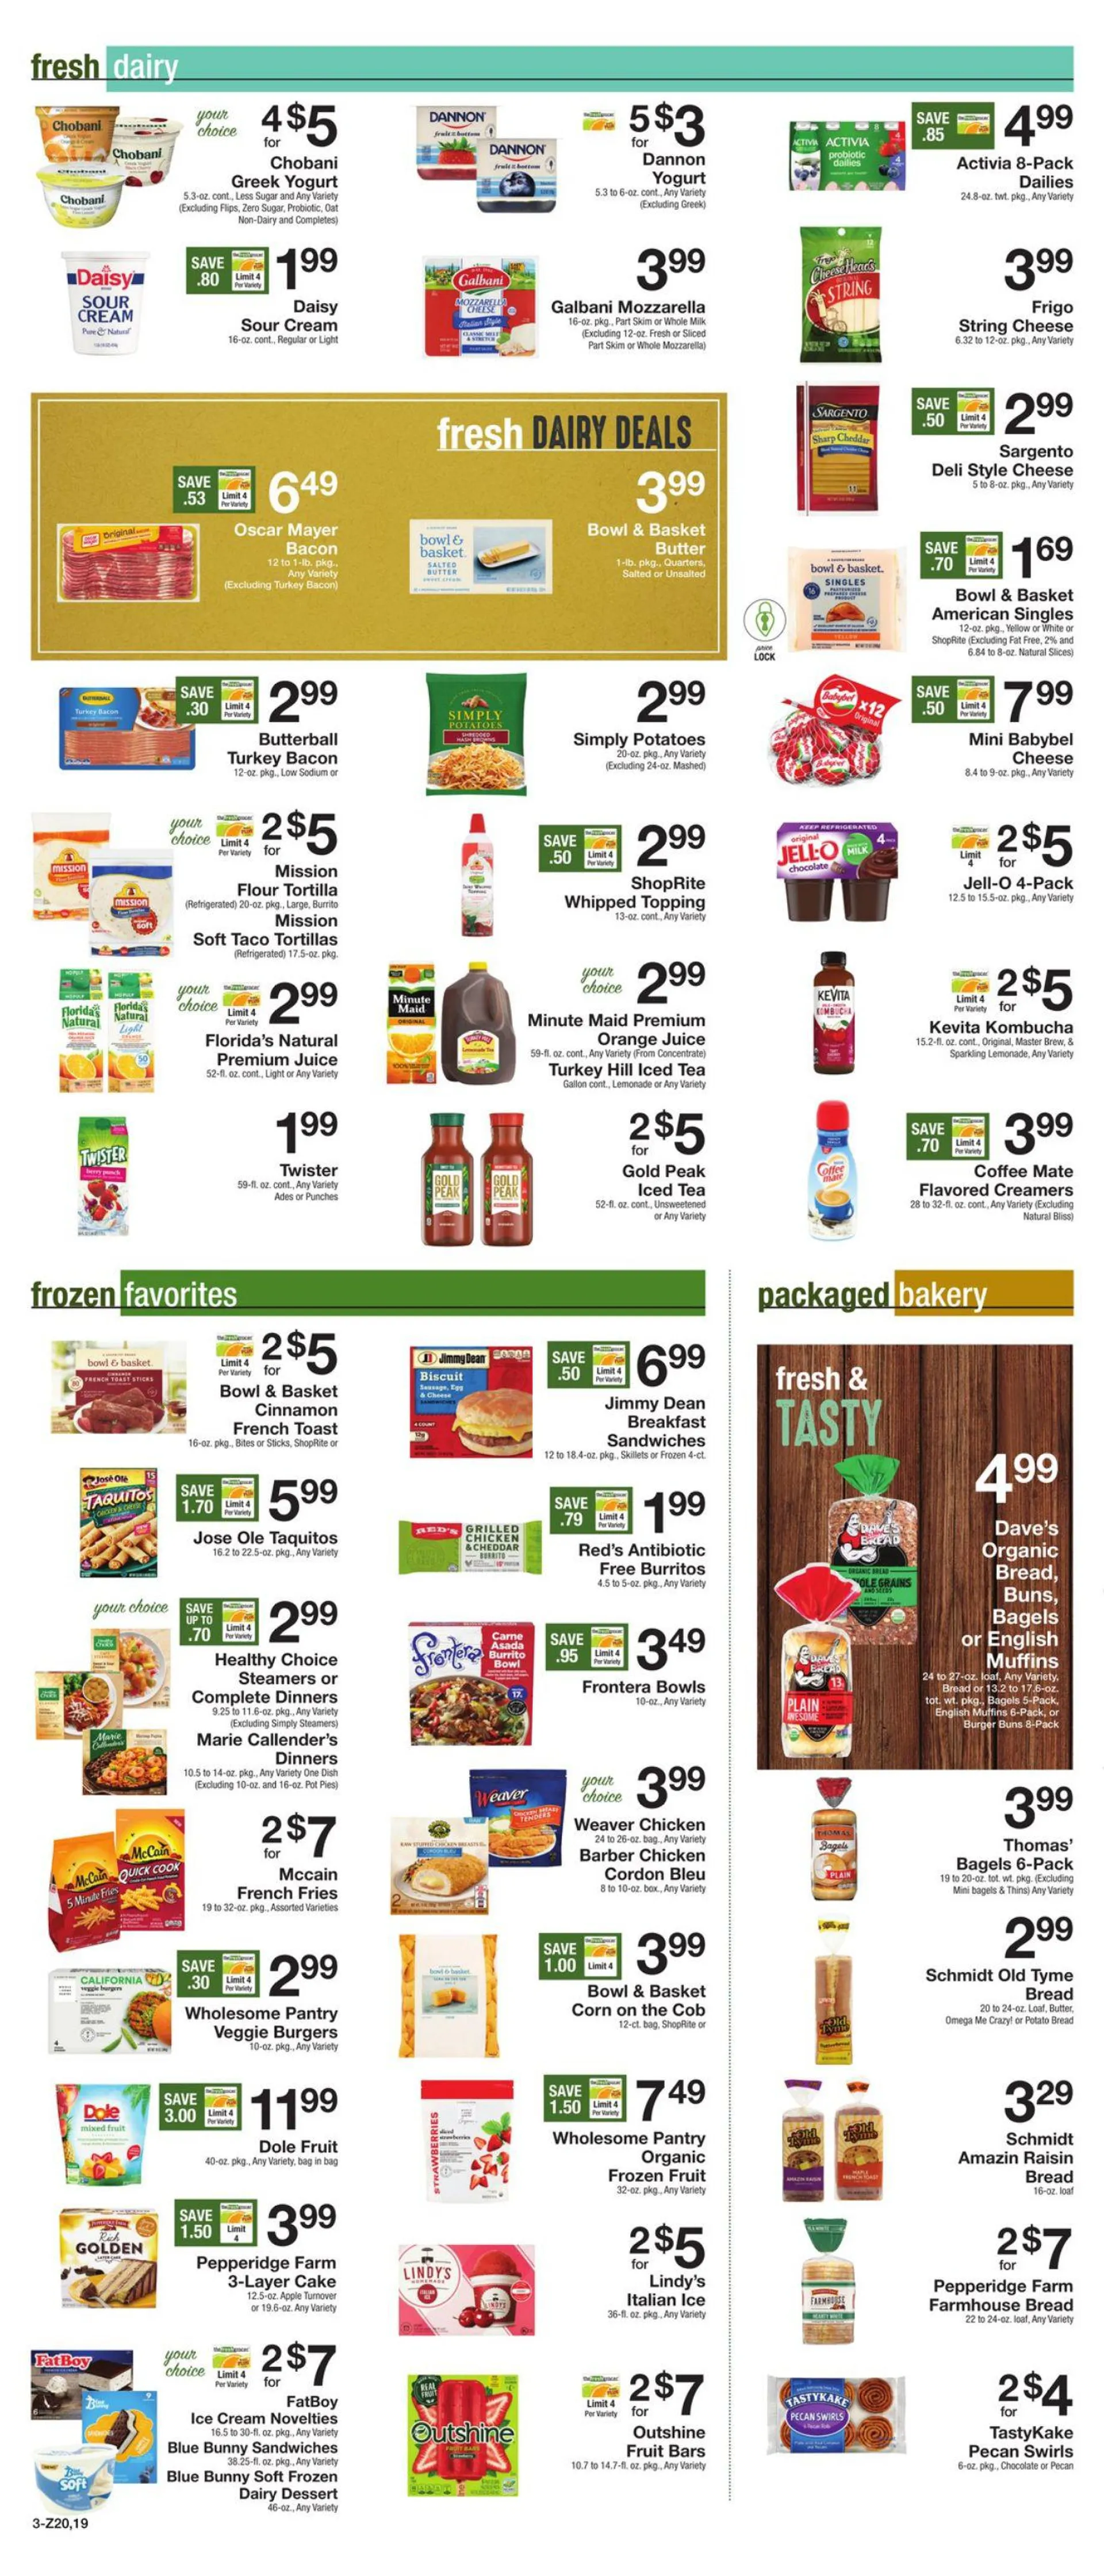 Gerritys Supermarkets Current weekly ad - 3